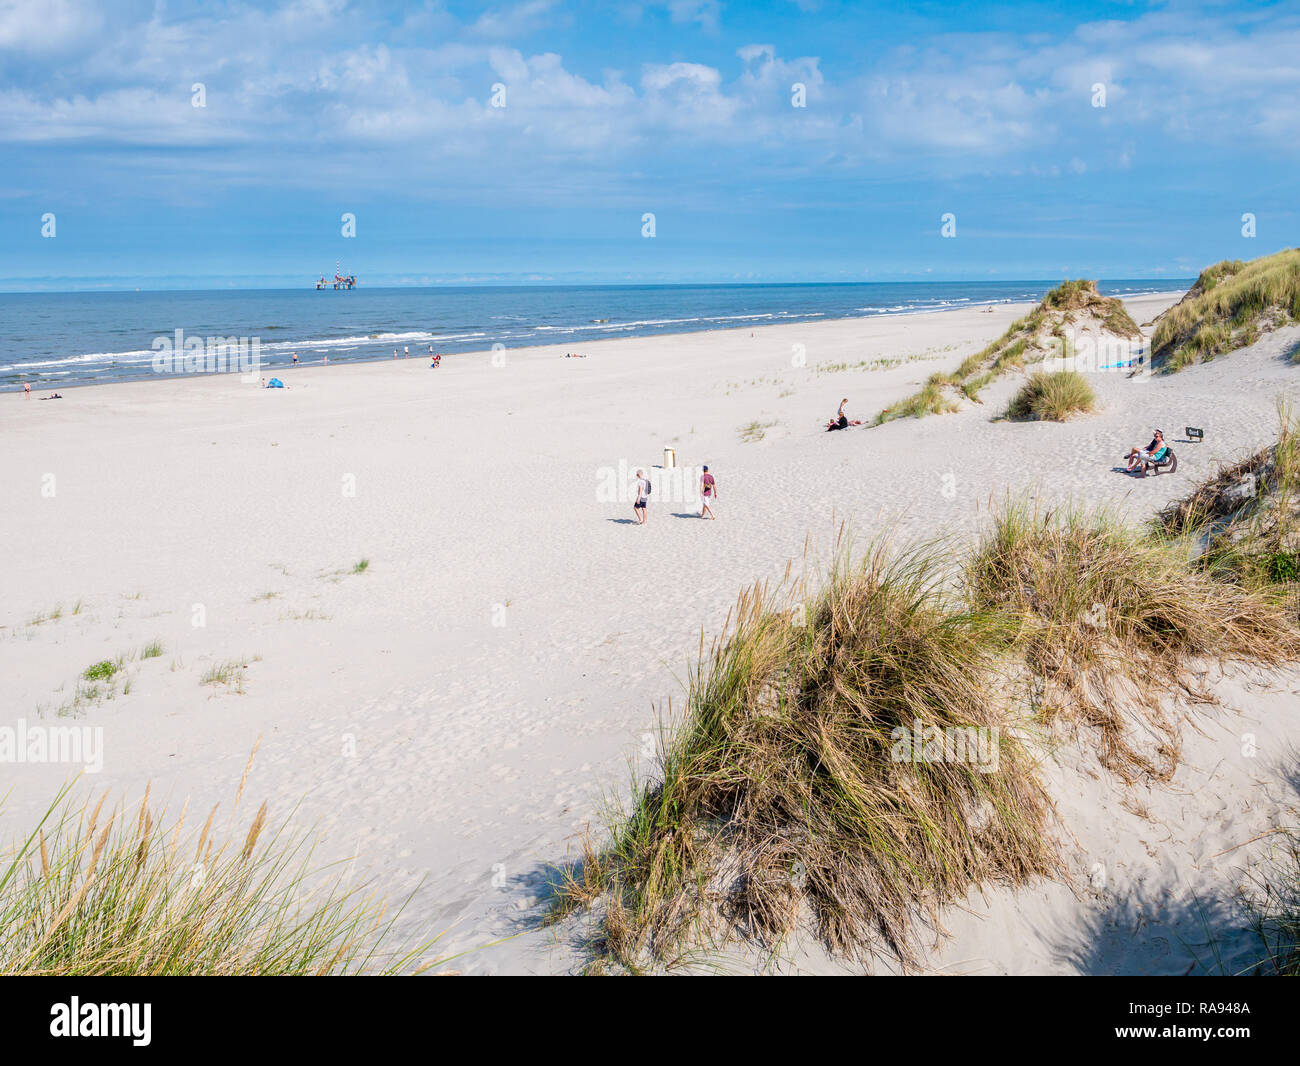 People on beach and North Sea with offshore drilling platform, West Frisian island Ameland, Friesland, Netherlands Stock Photo